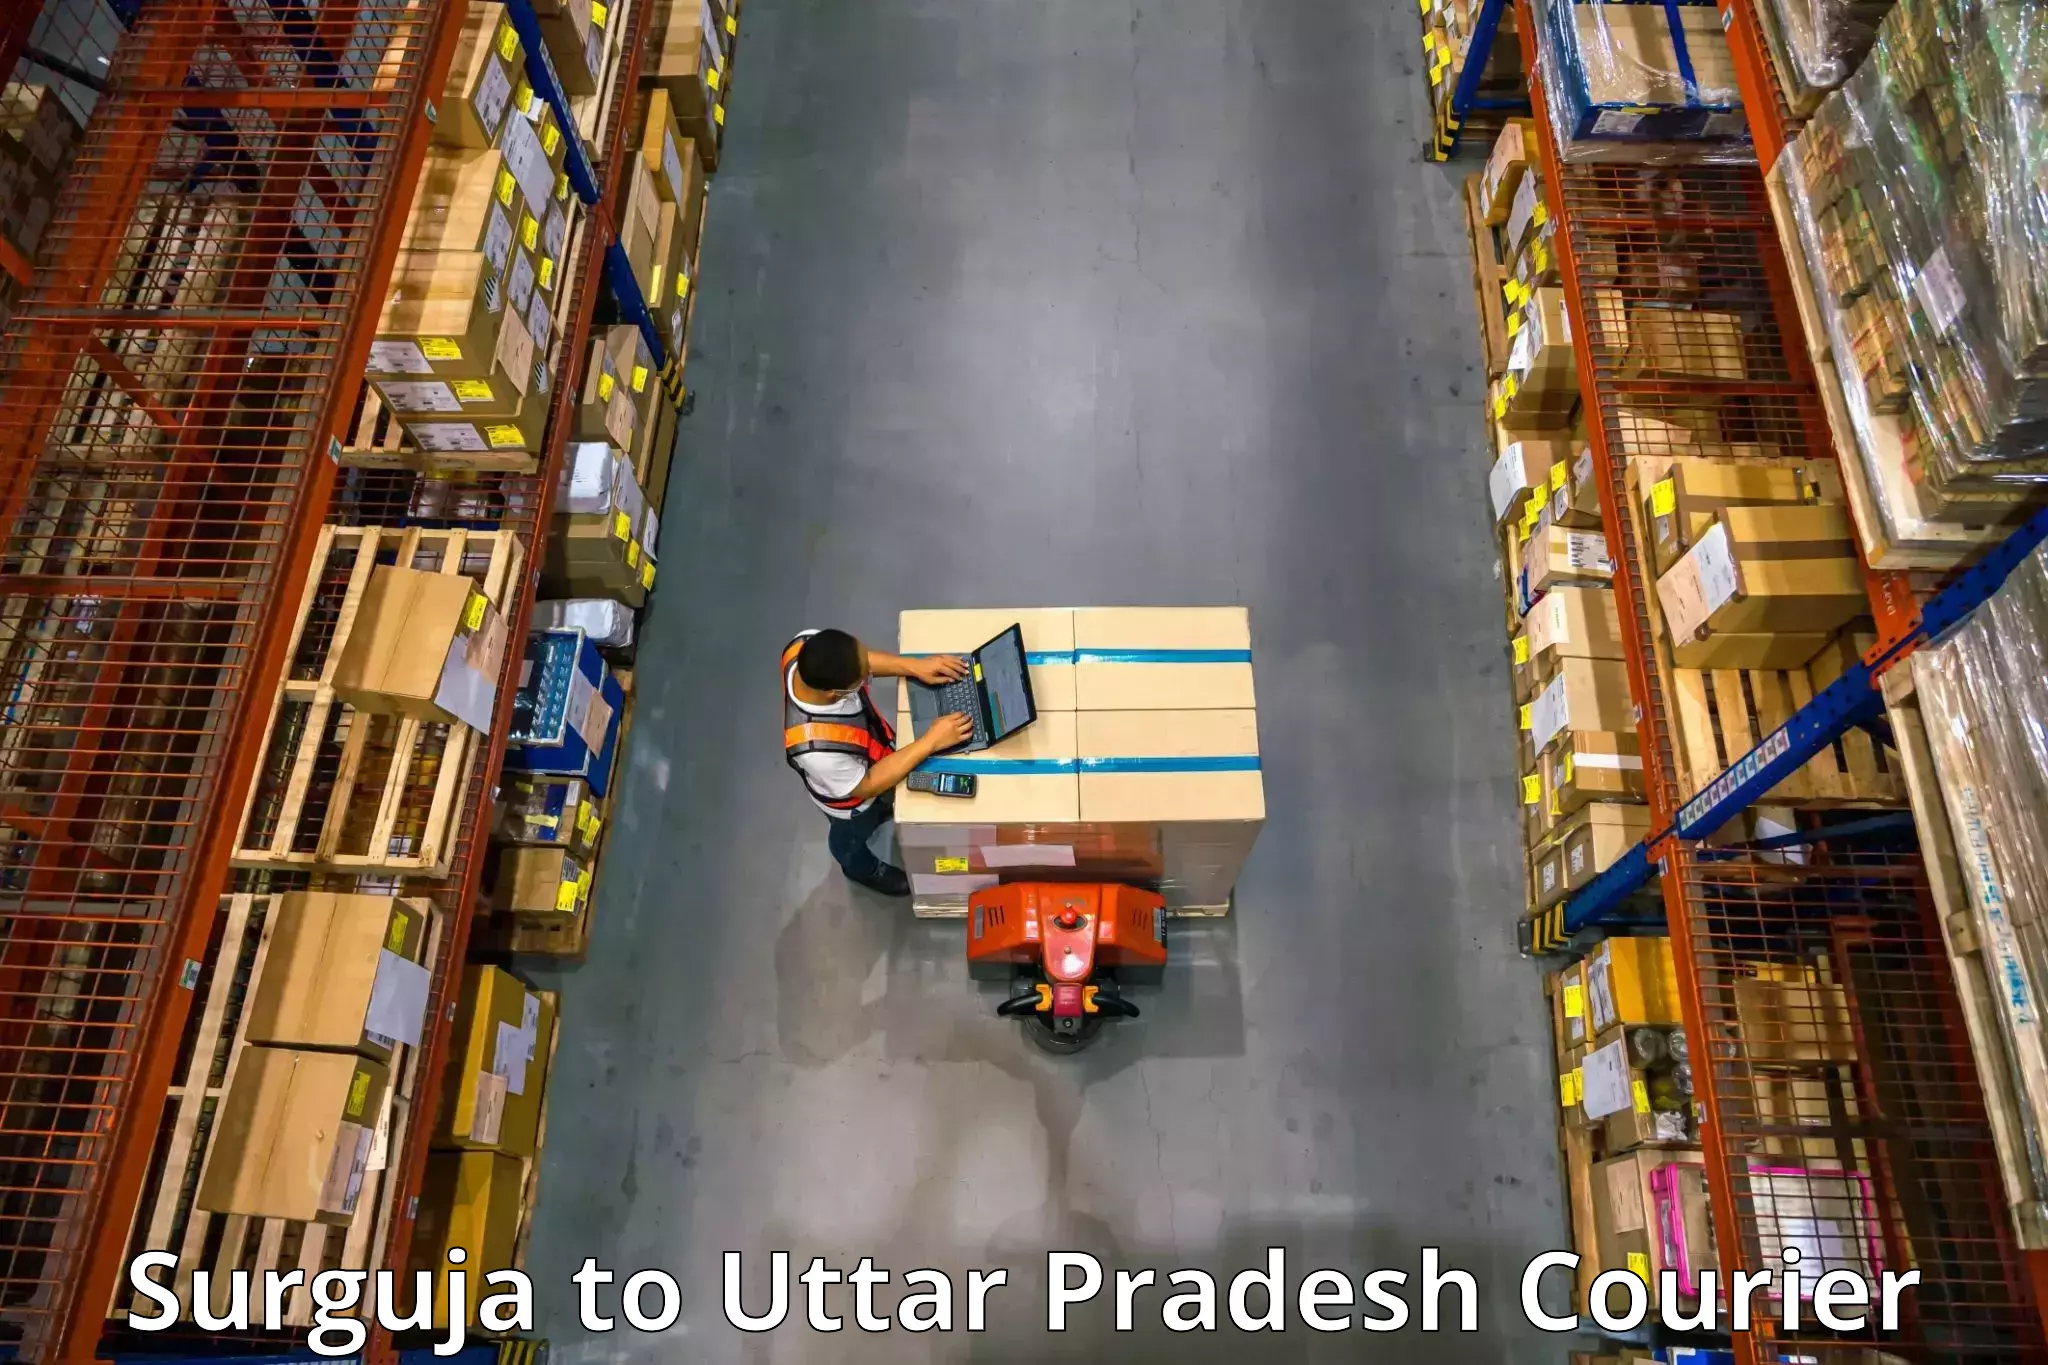 Efficient moving company Surguja to Maripeda